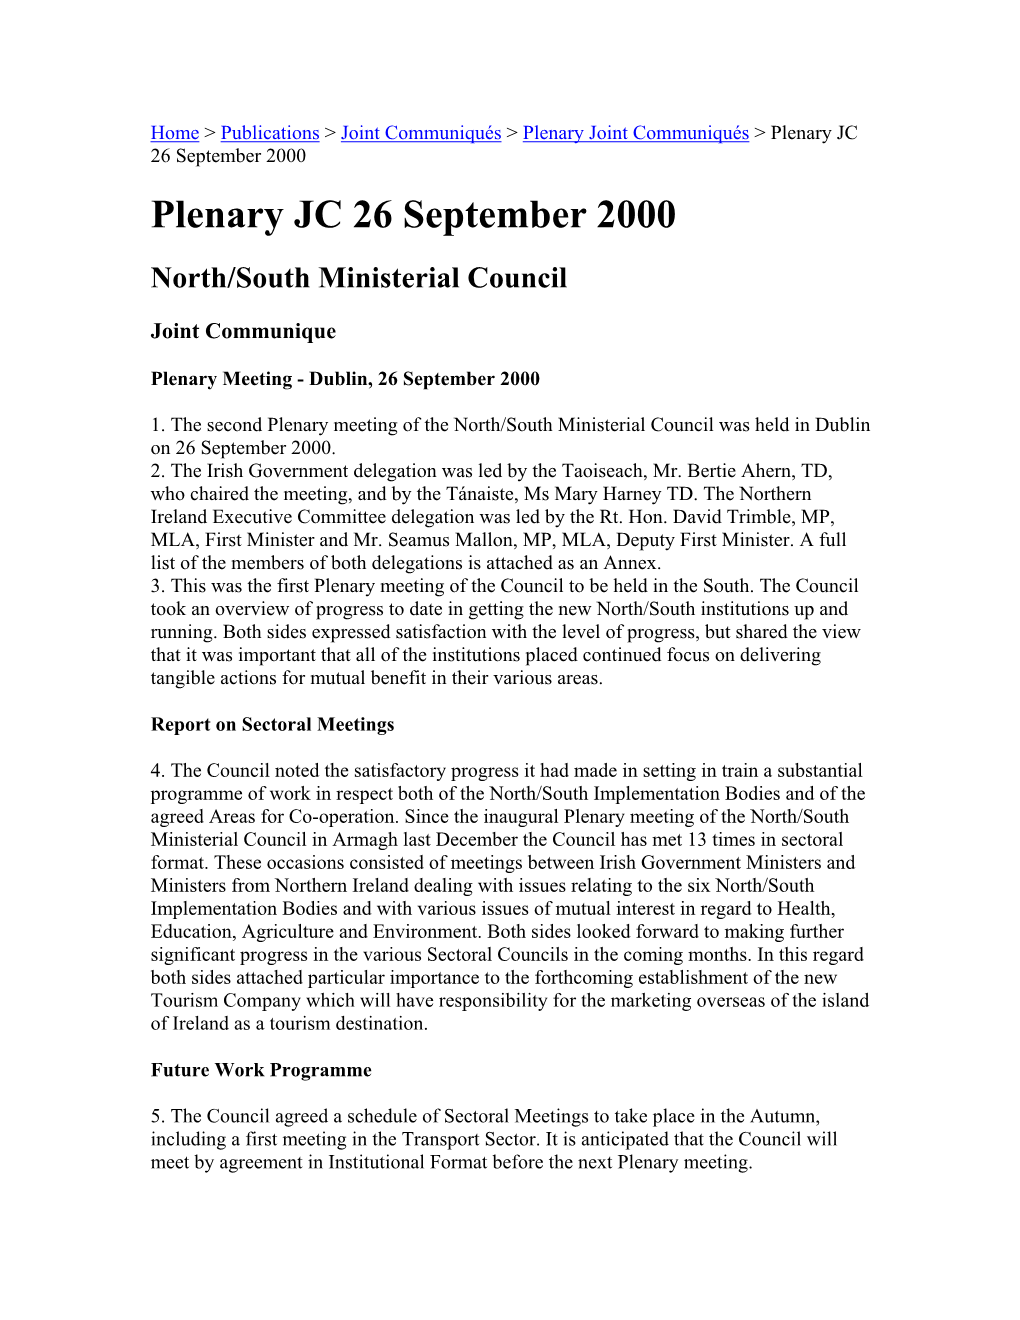 Plenary JC 26 September 2000 Plenary JC 26 September 2000 North/South Ministerial Council